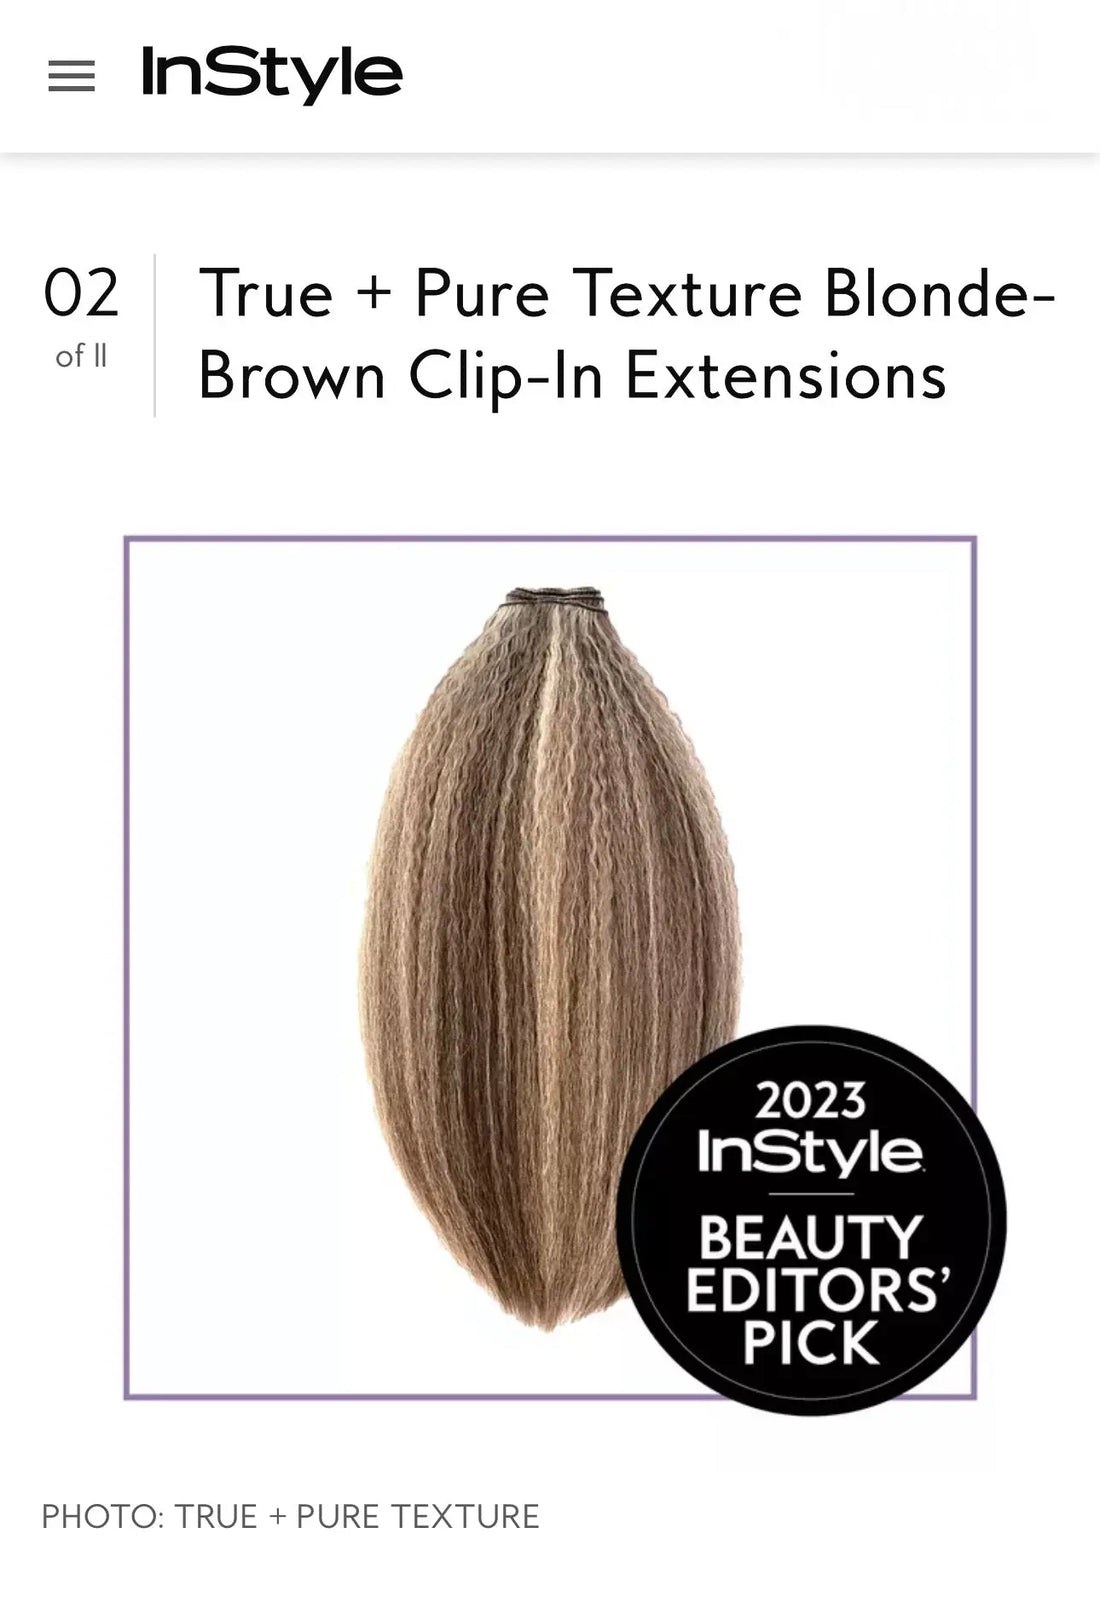 InStyle Beauty Editor's Pick: True + Pure Texture Blonde-Brown Clip In Extensions (True Colors) - True and Pure Texture